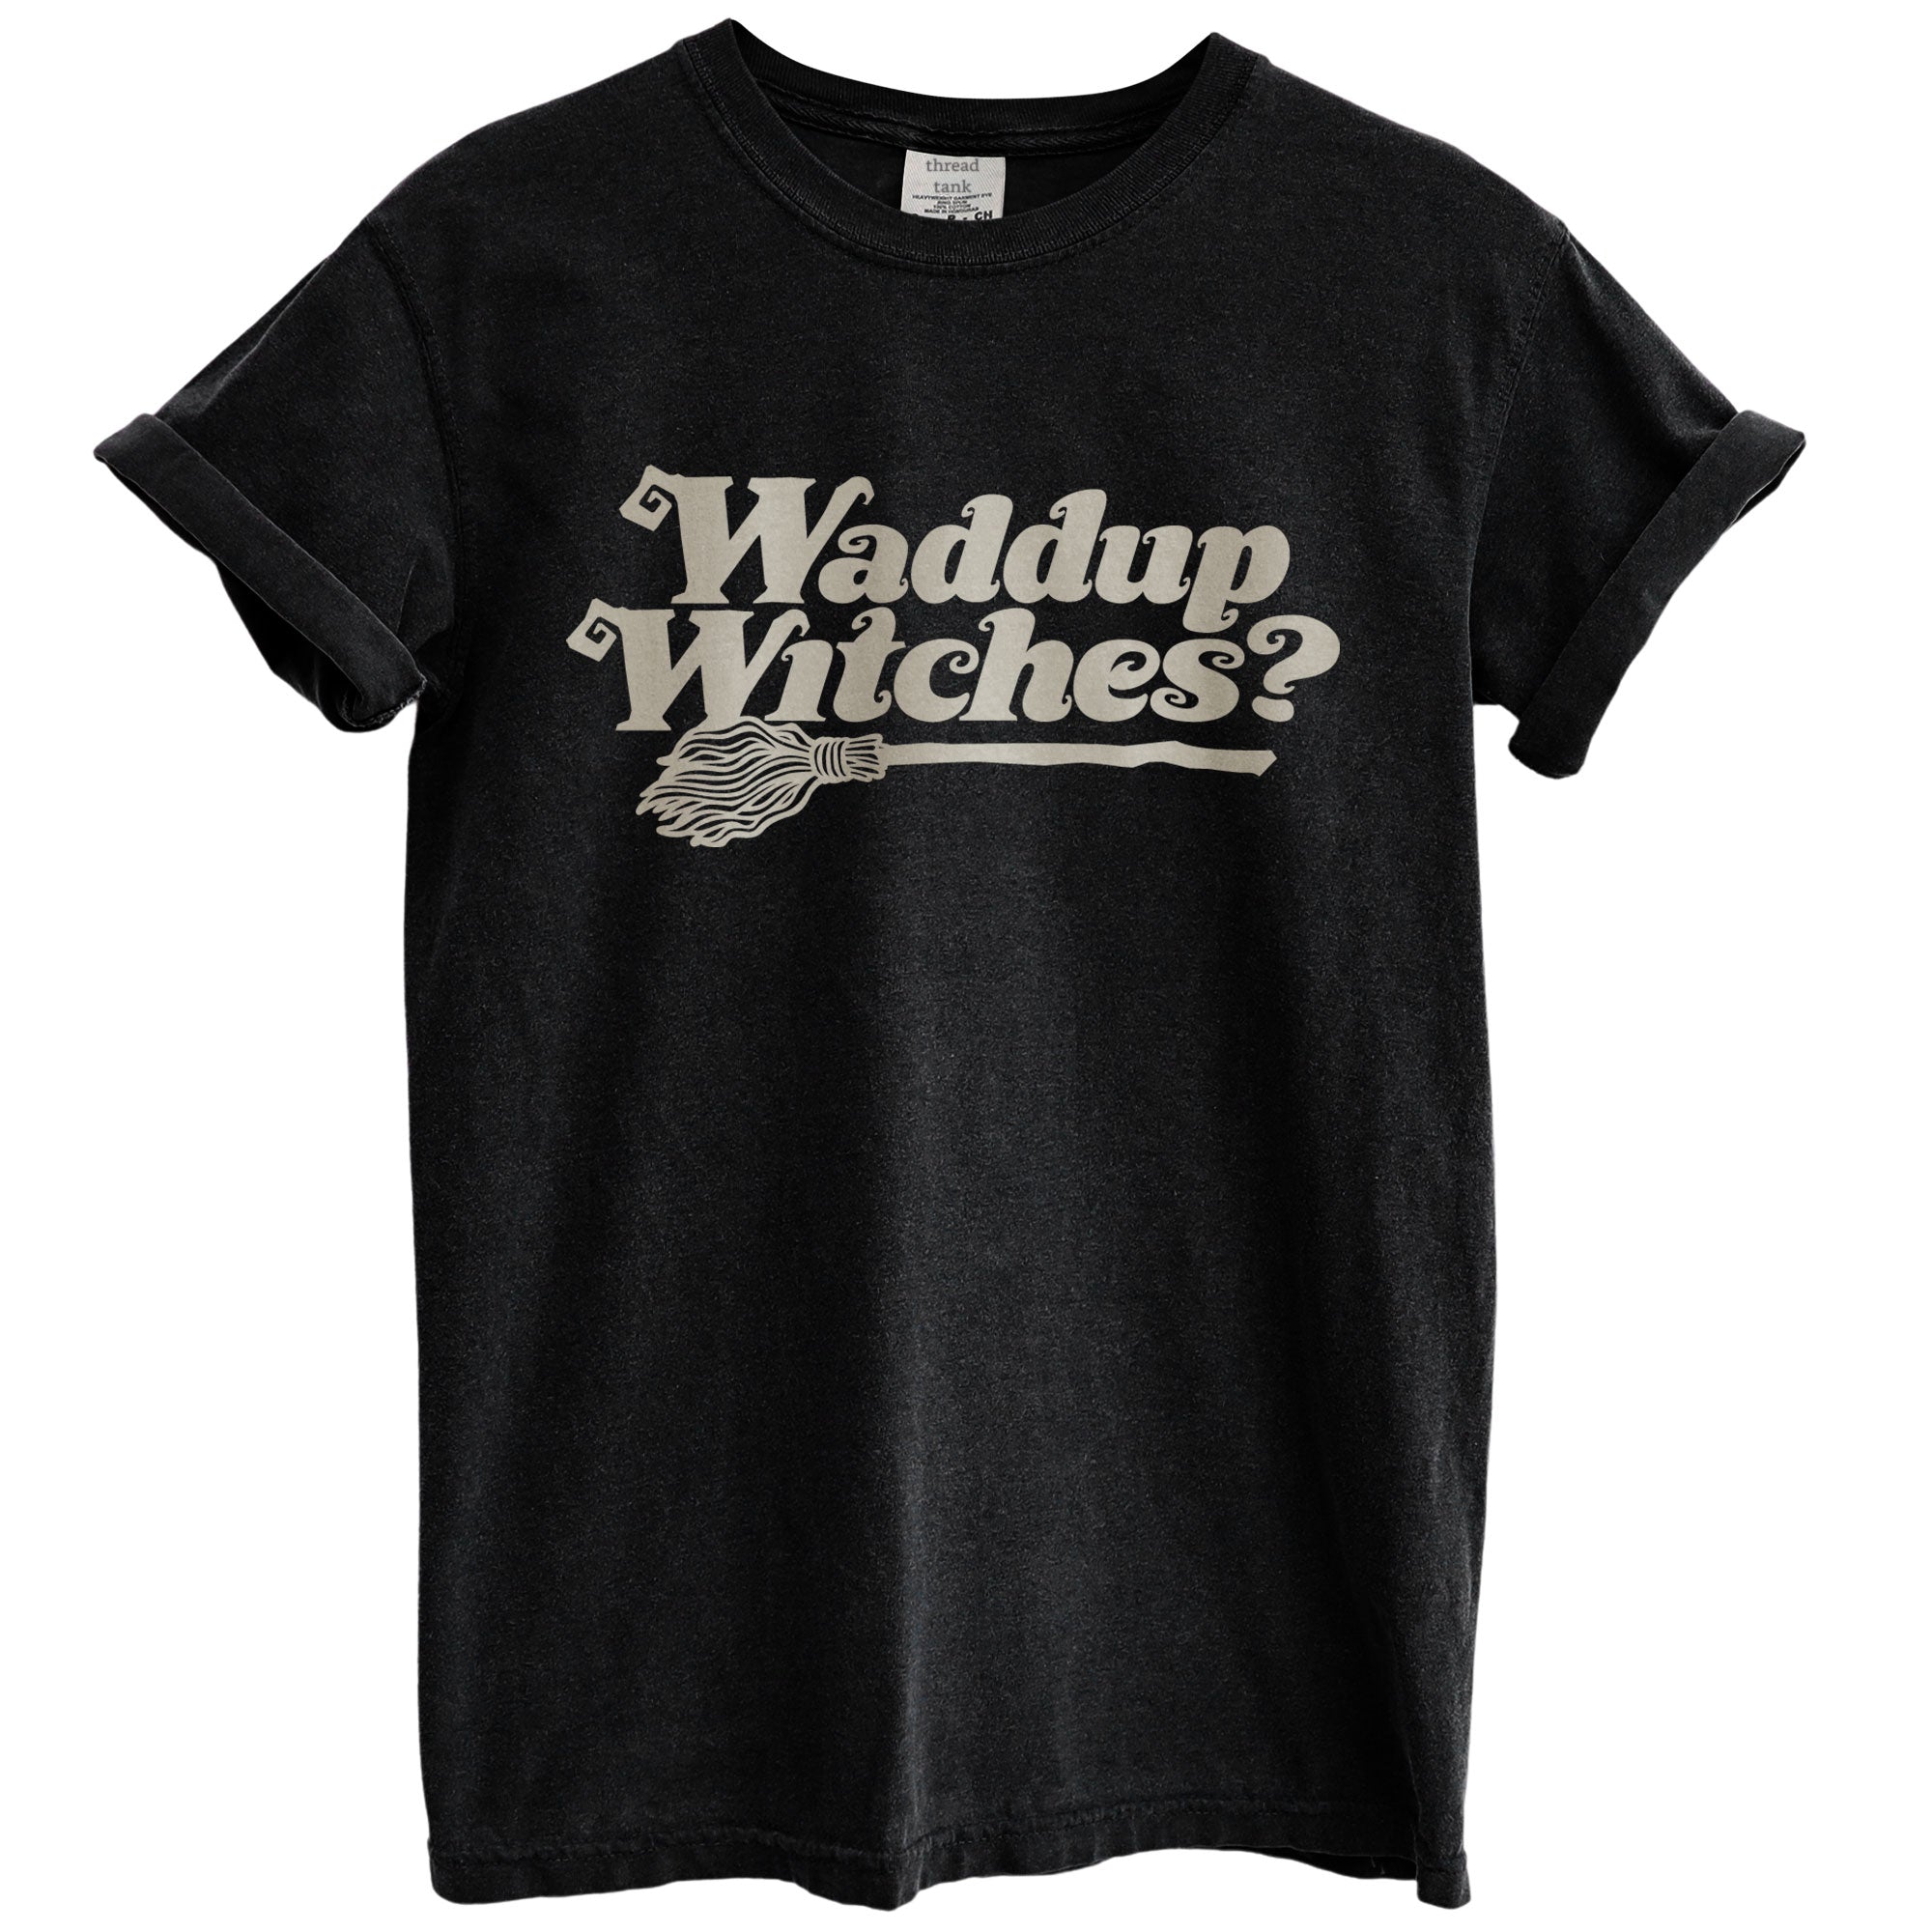 waddup witches oversized garment dyed shirt